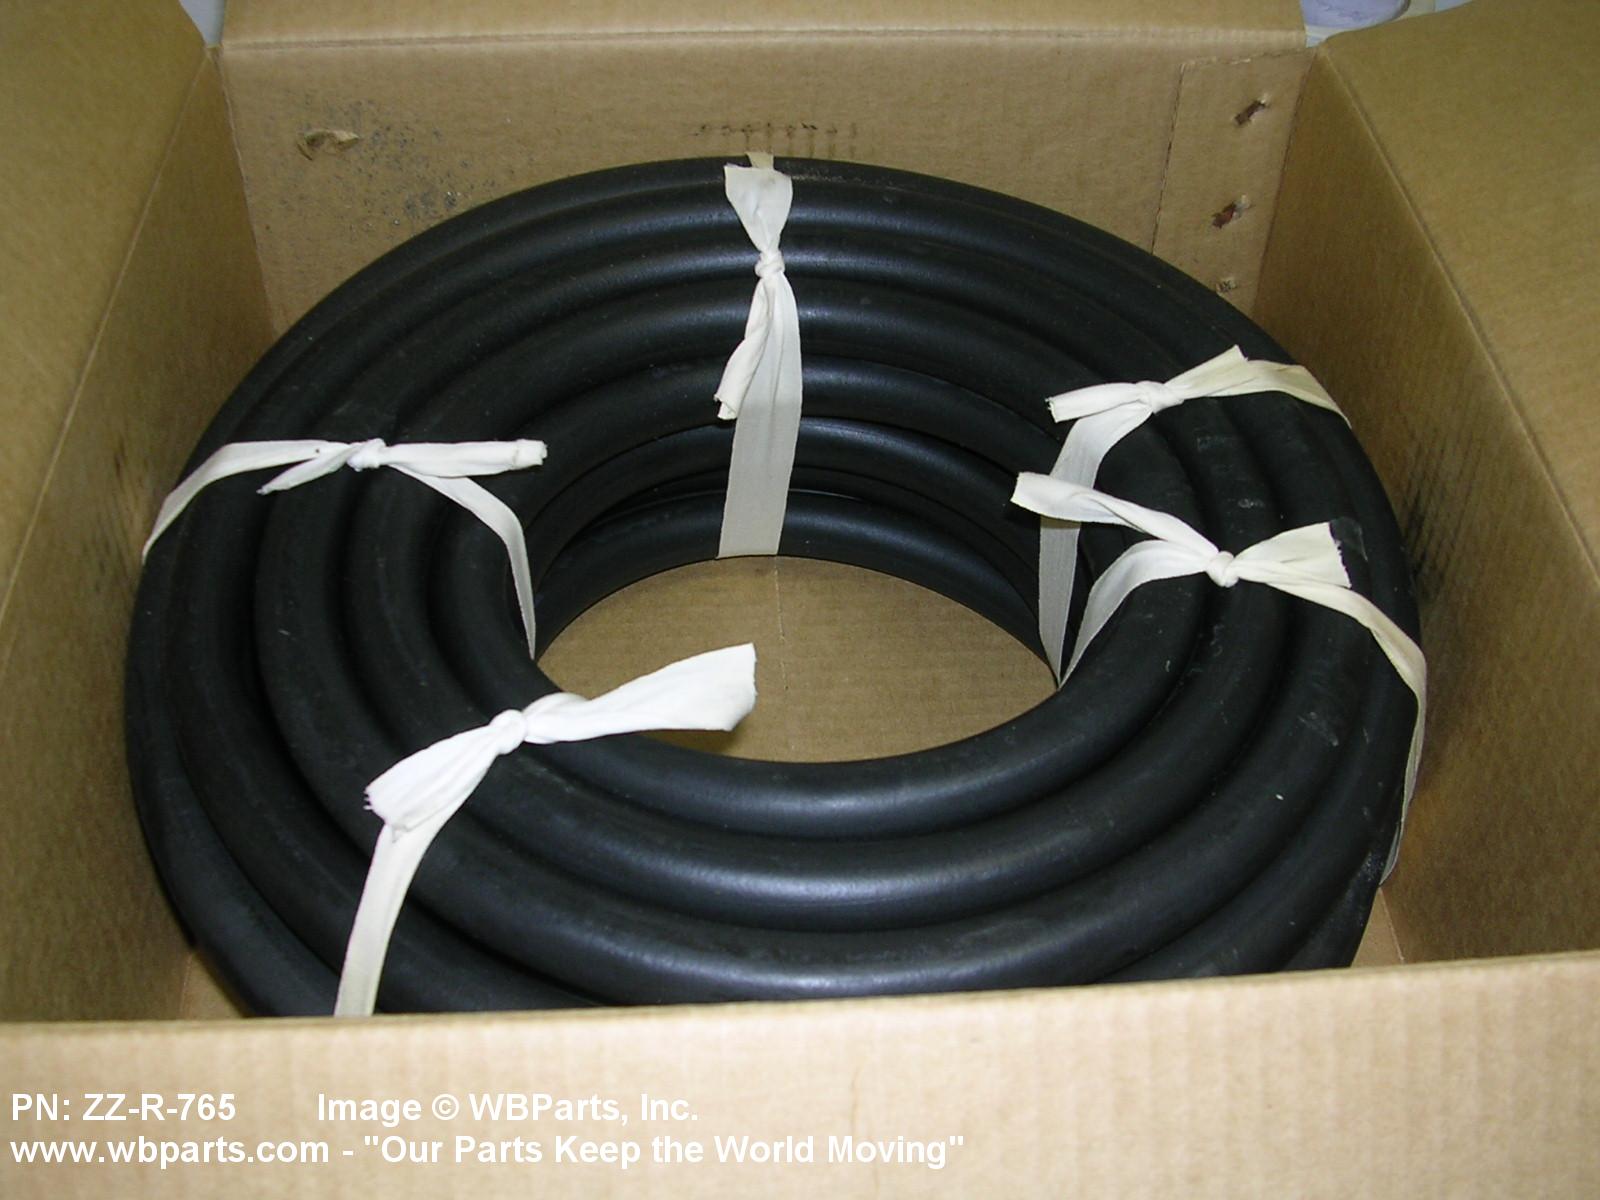 93 01 032 61 Solid Rubber Sheet f5 030 F 5 fs Wbparts